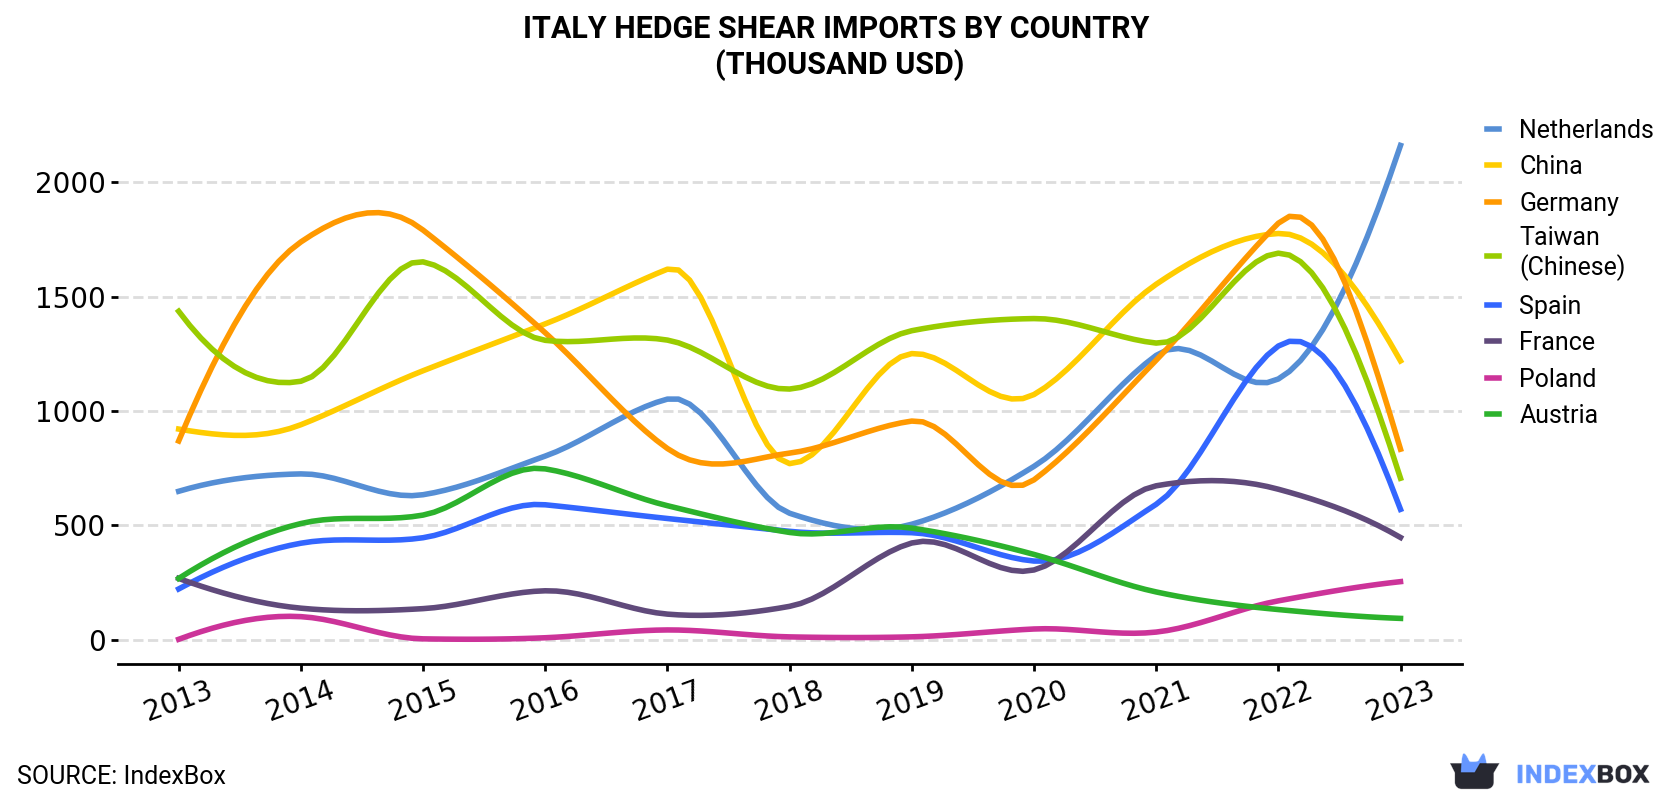 Italy Hedge Shear Imports By Country (Thousand USD)